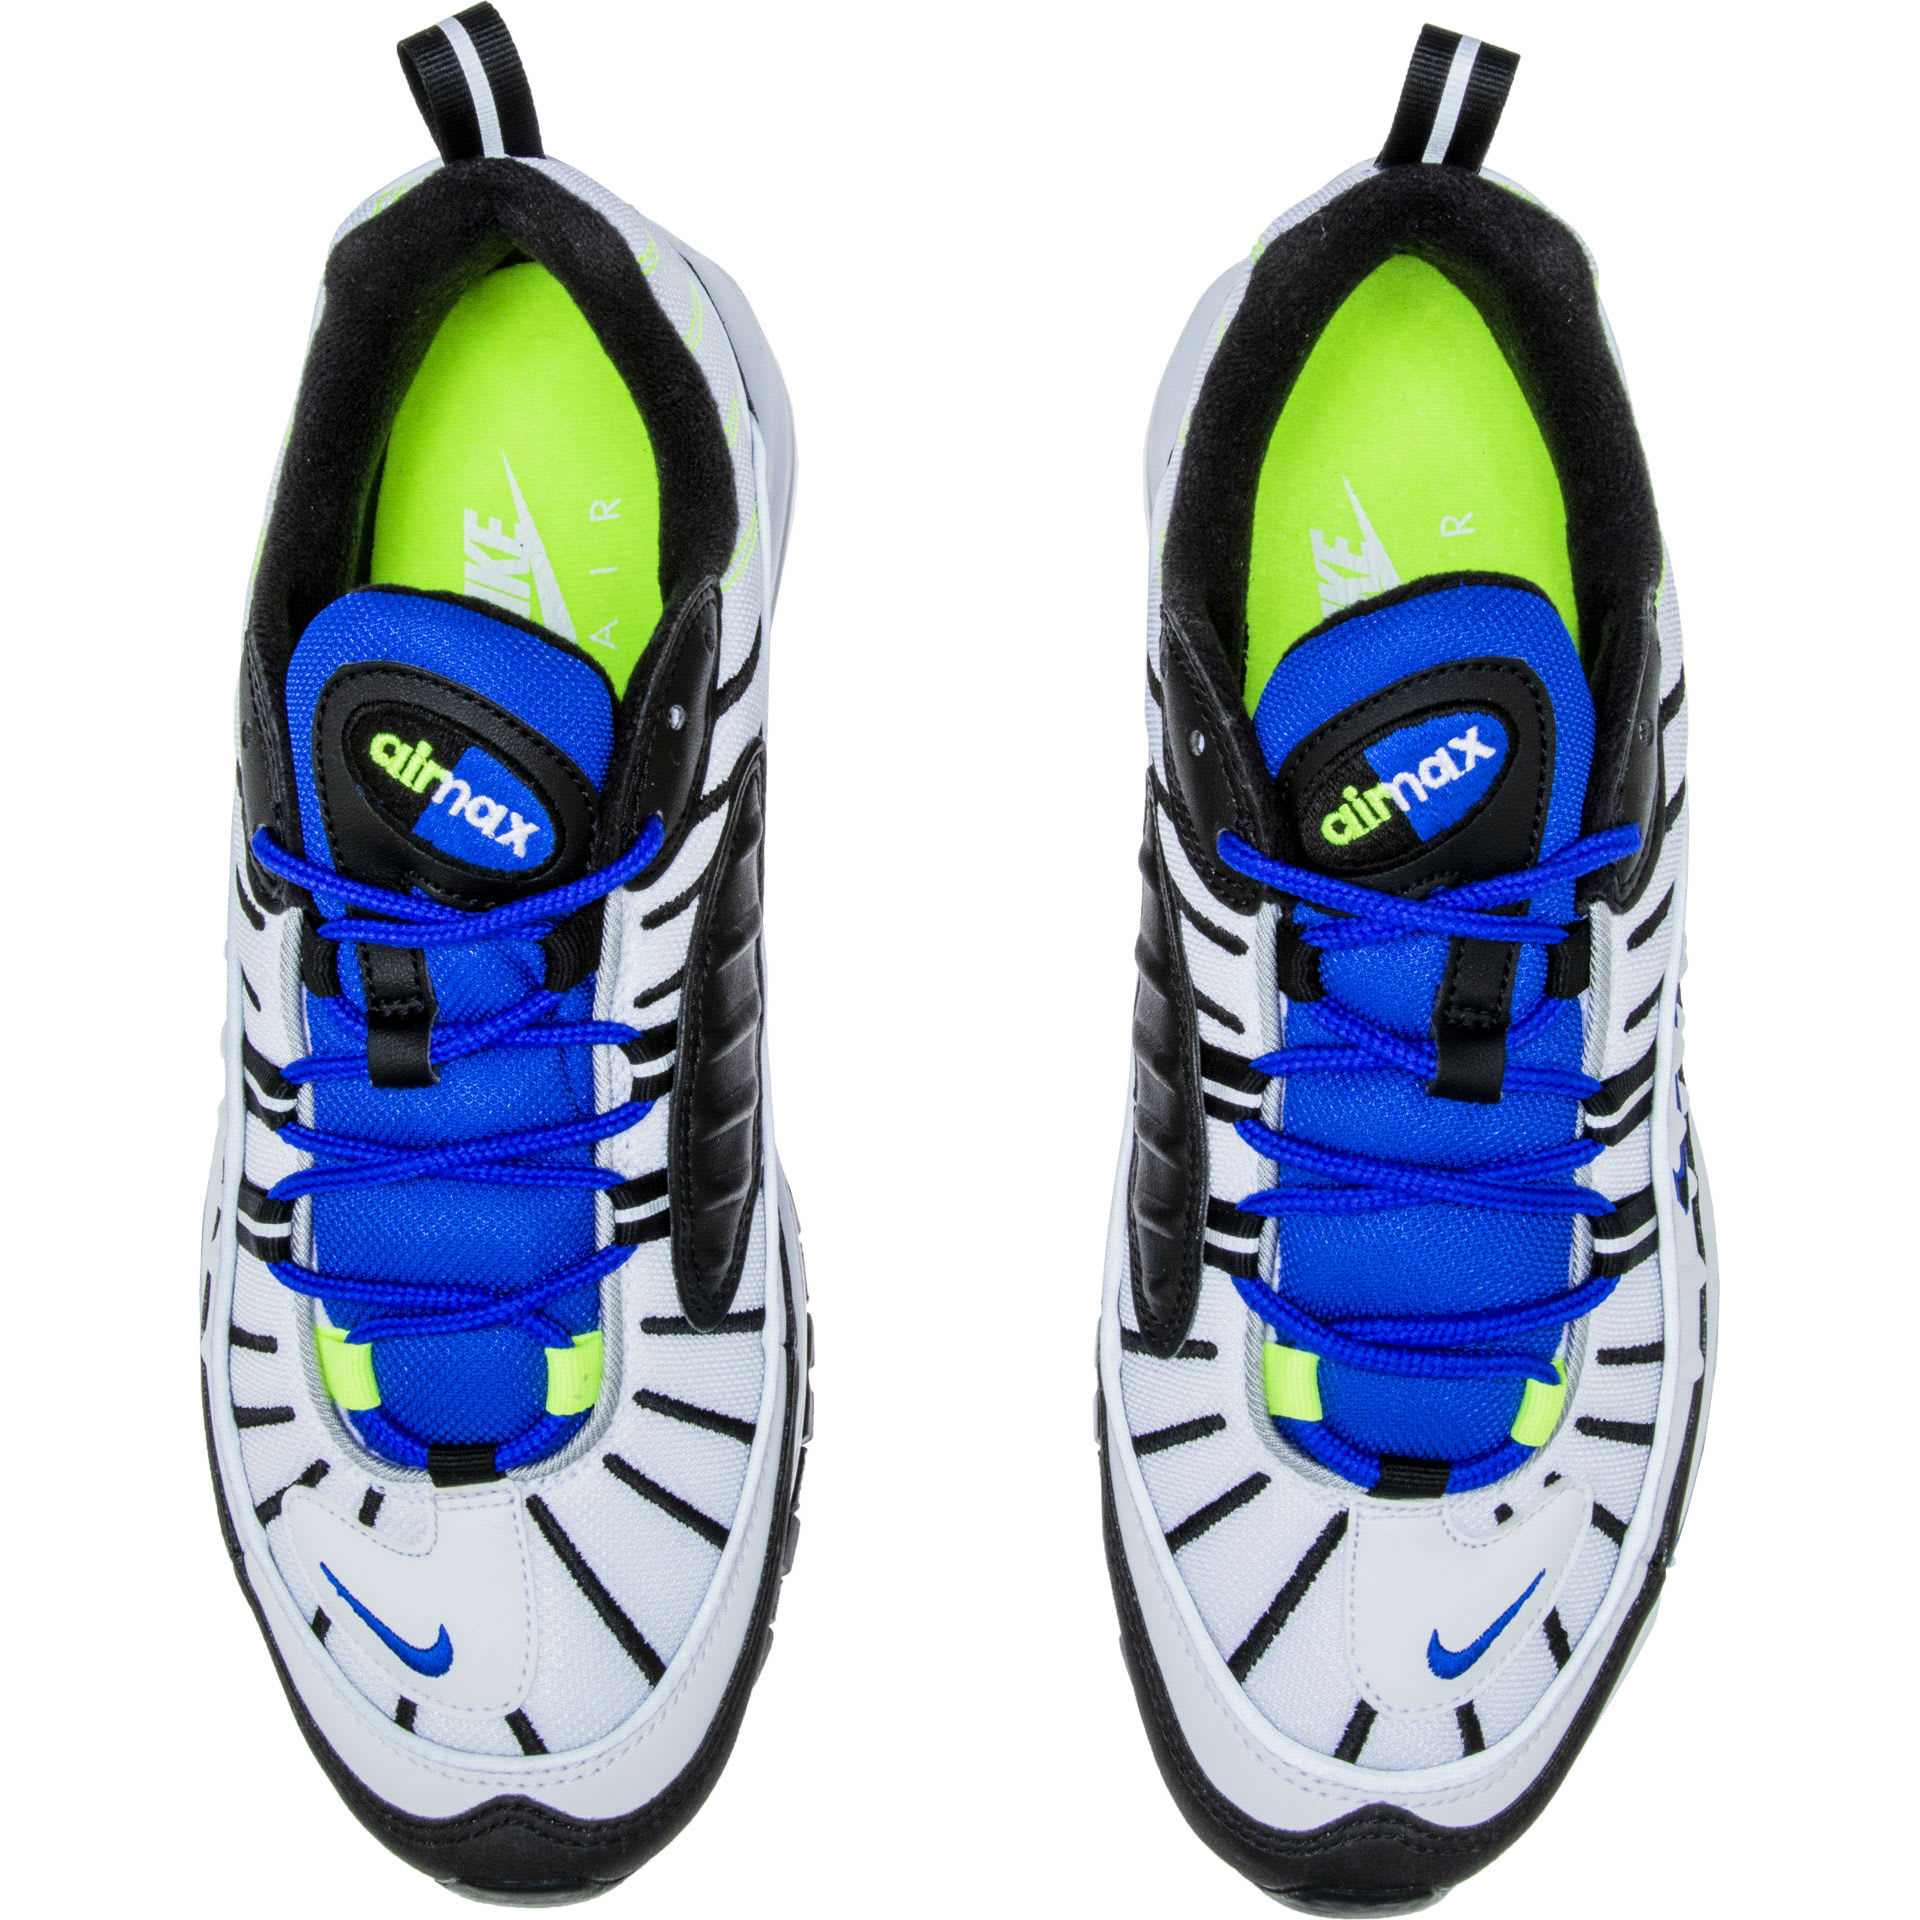 Nike Air Max 98 White Black Racer Blue Volt Release Date 640744-103 Top